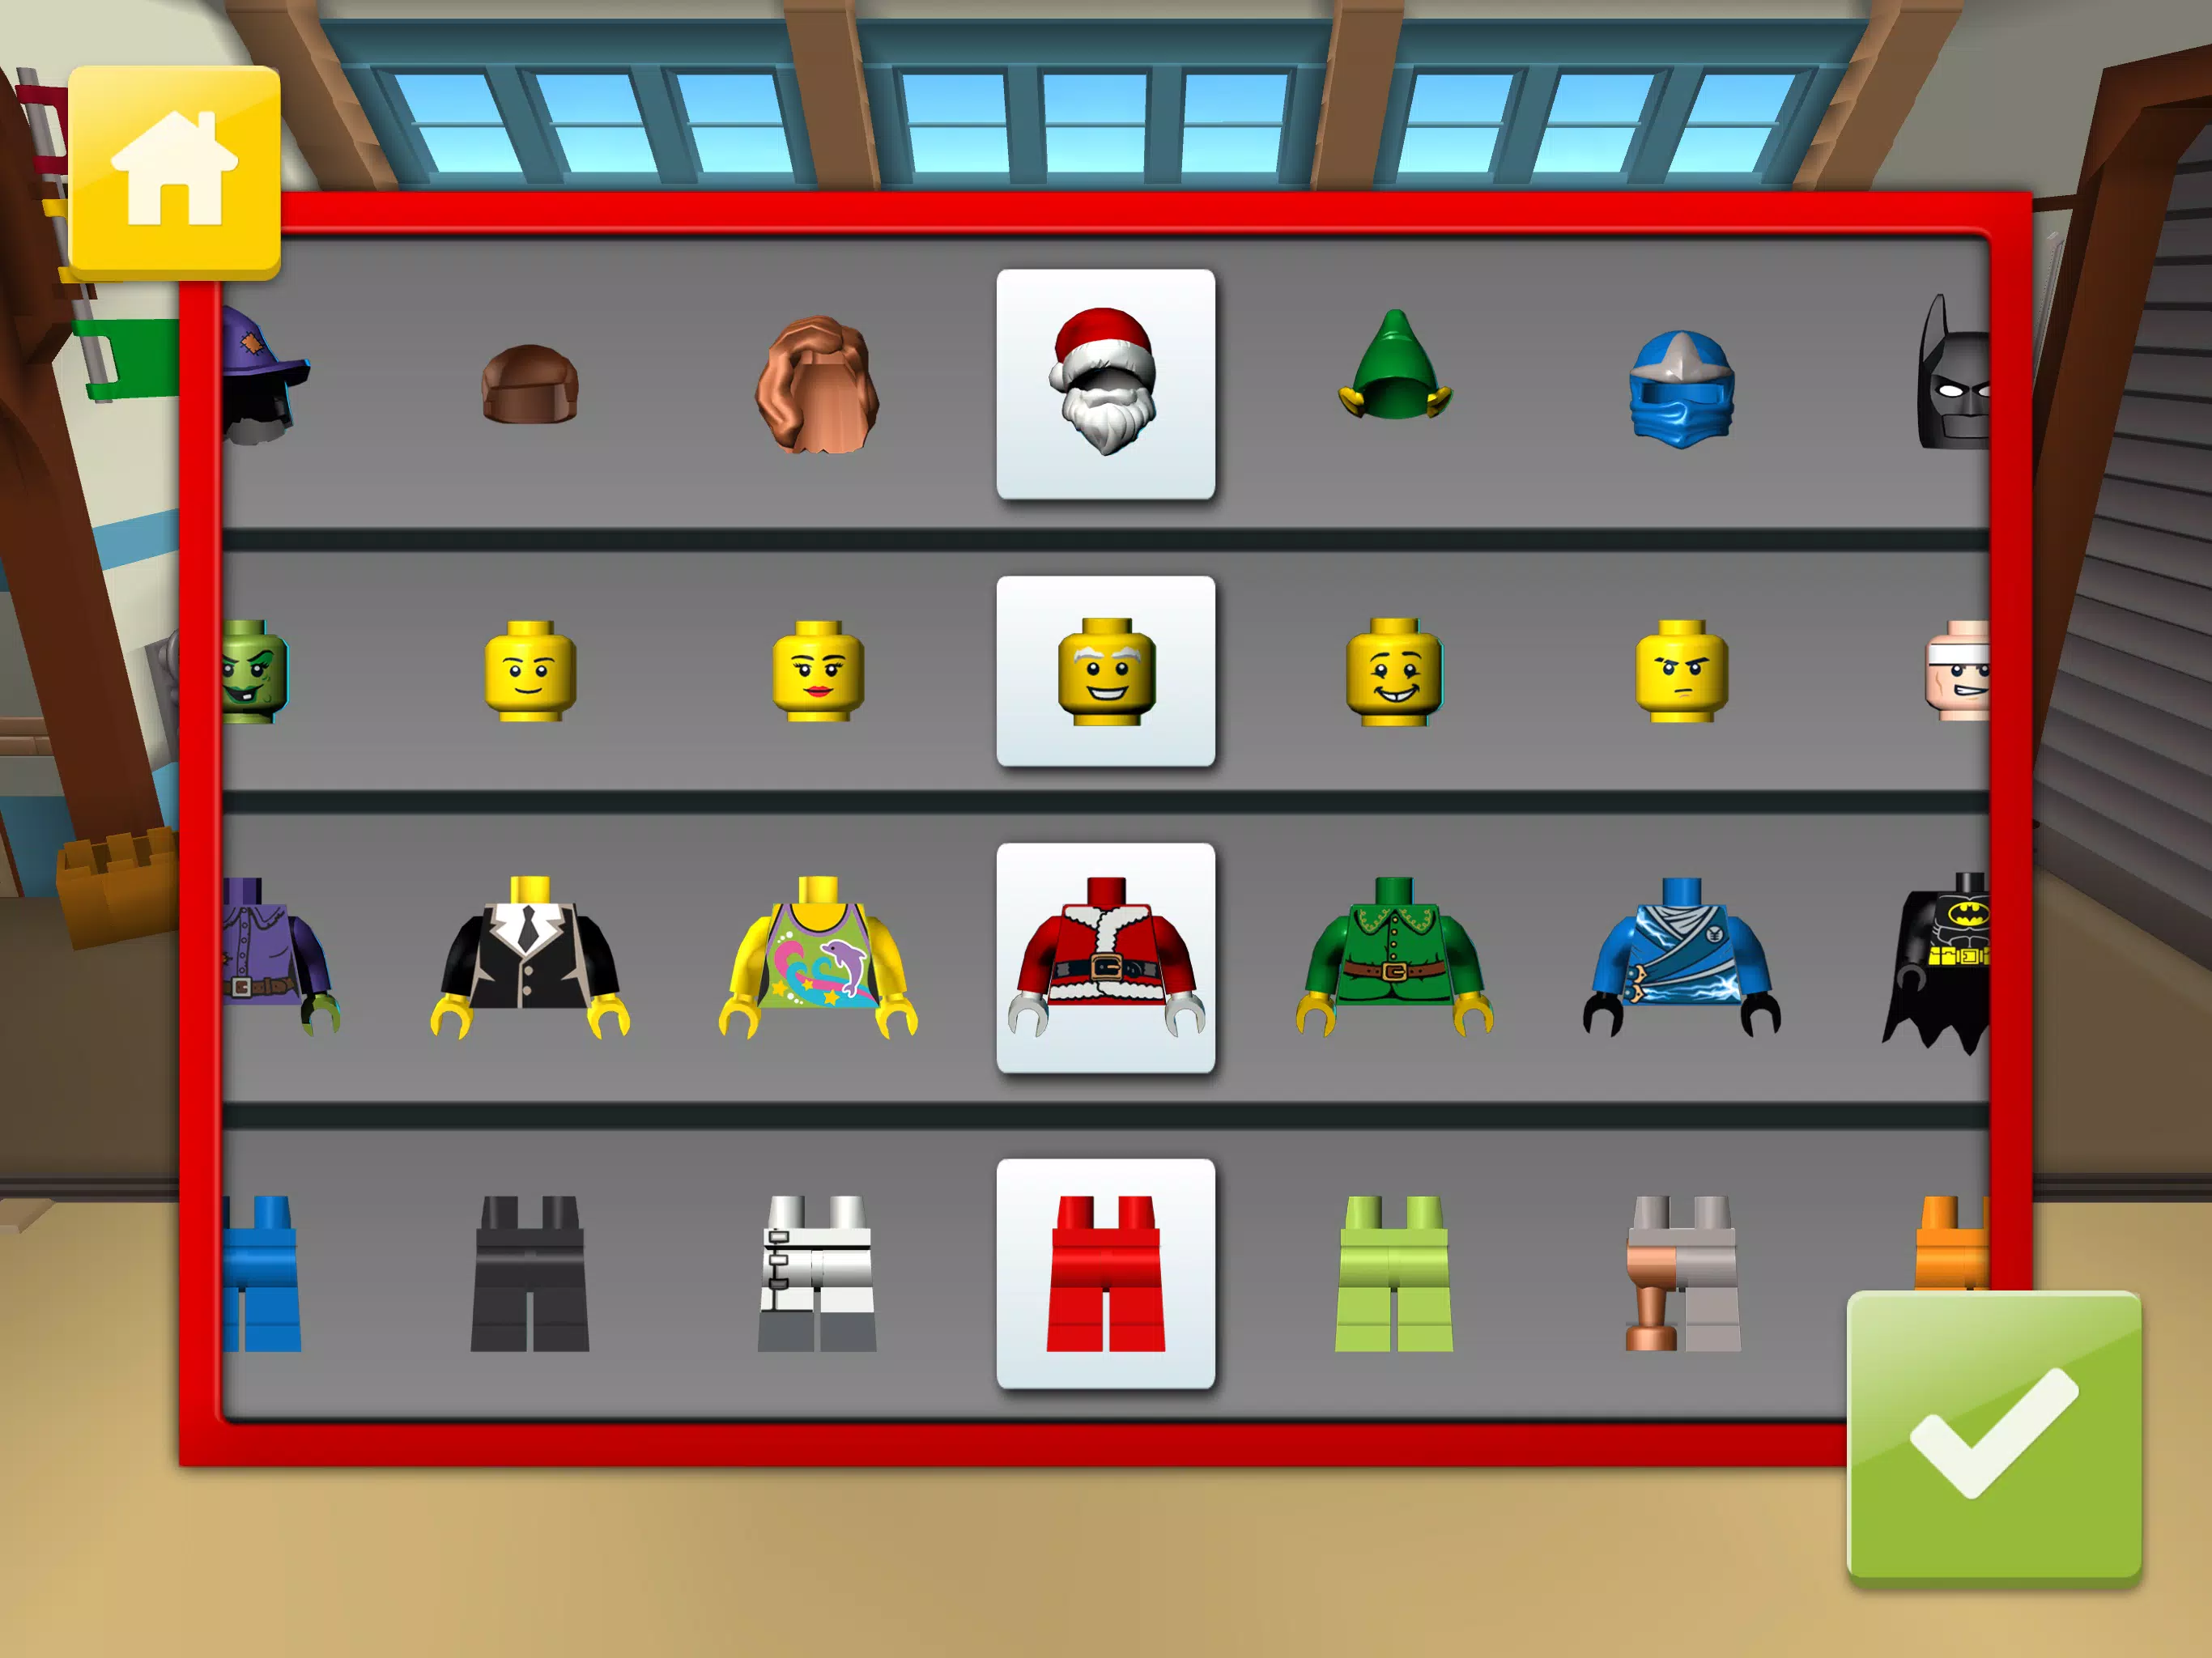 LEGO® Juniors Create & Cruise for Android - APK Download